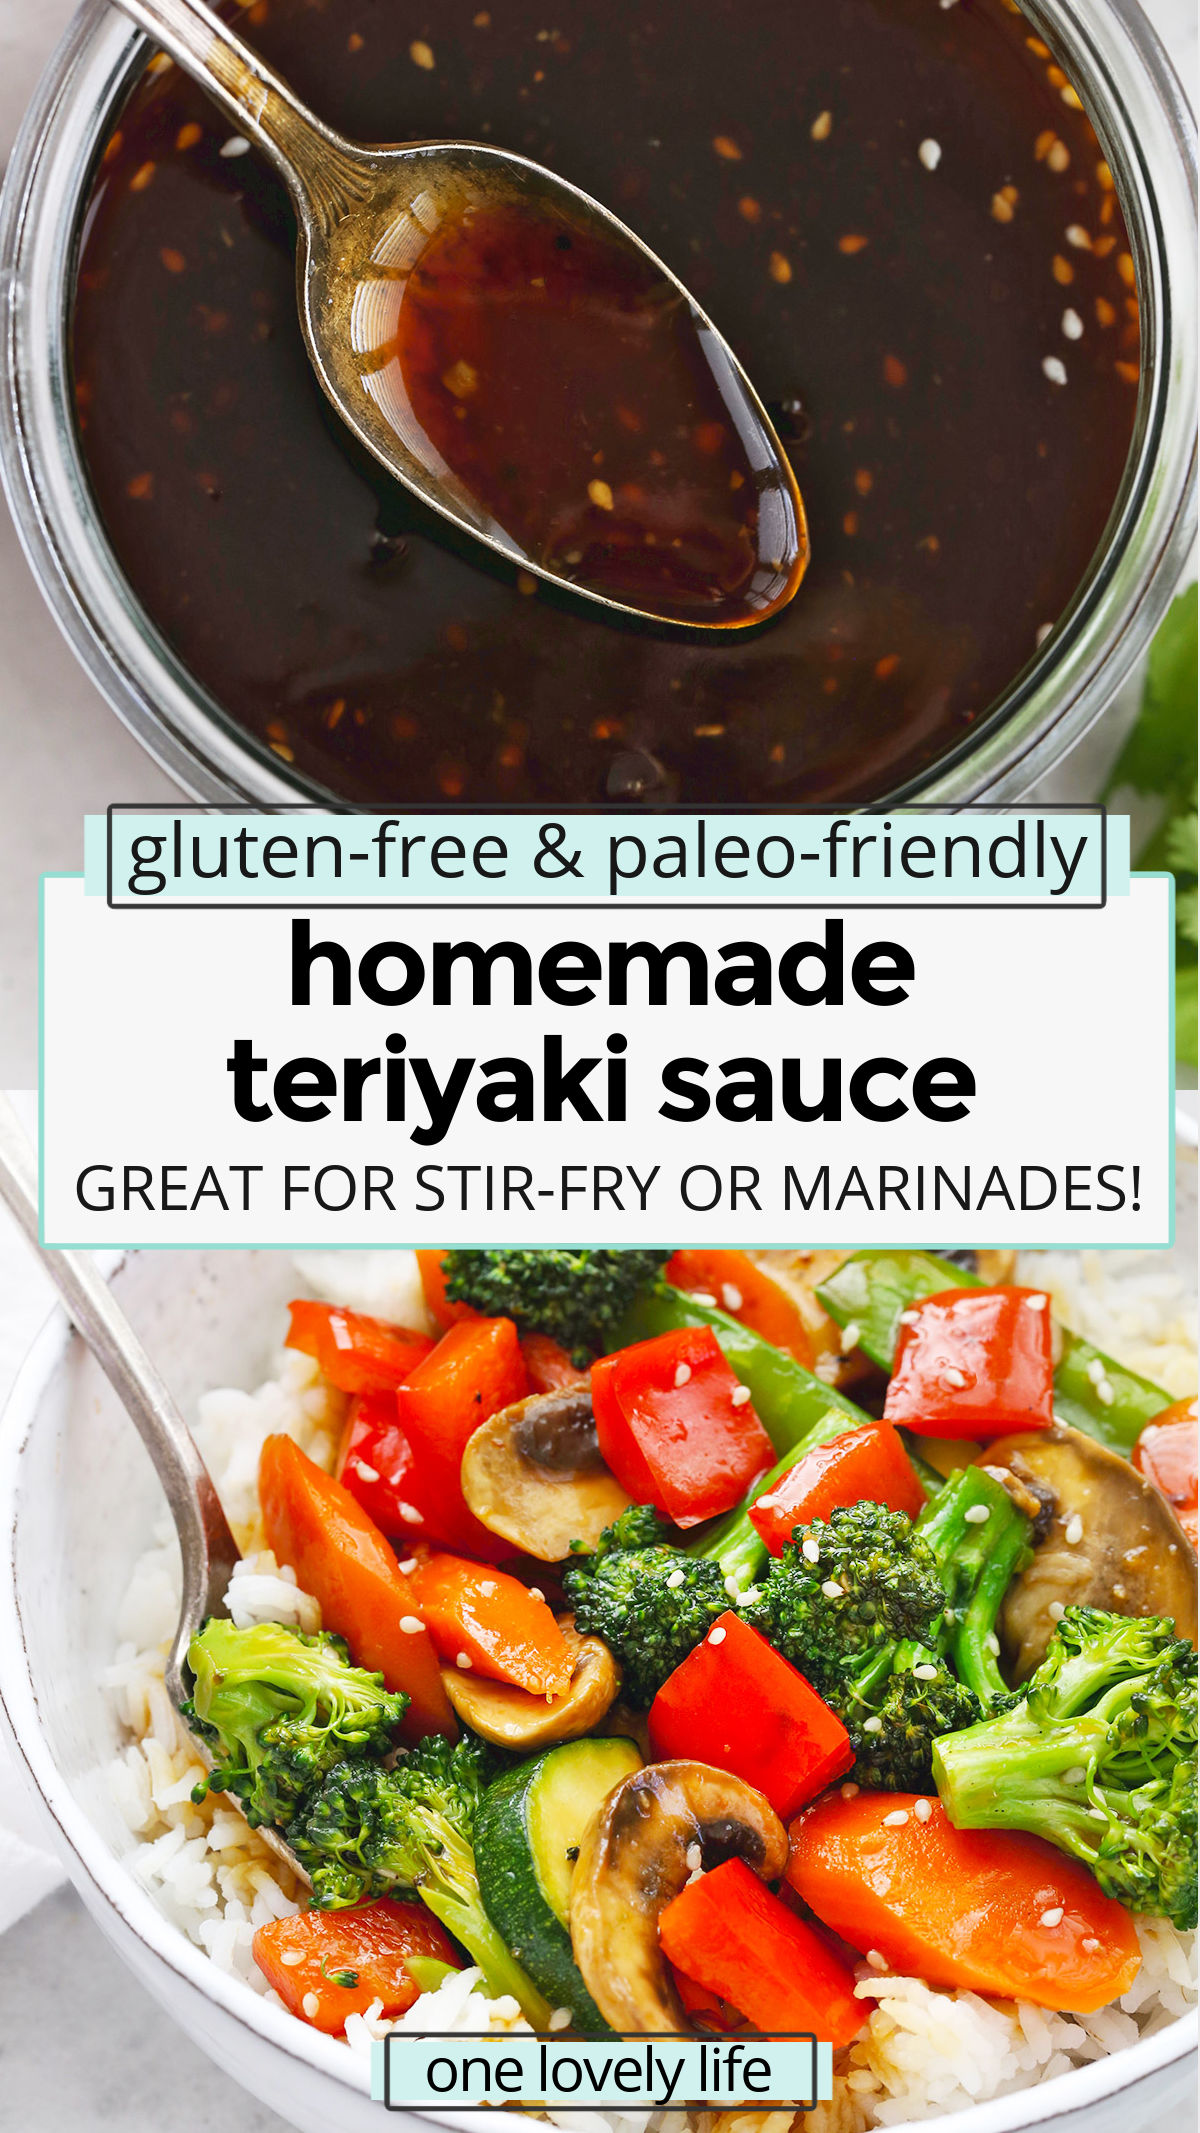 Homemade Teriyaki Sauce - Elevate your stir-fry game with this gluten-free teriyaki sauce! It comes together in a snap and tastes great on stir-fry, salmon, chicken, noodle bowls & more. (Gluten-Free, Paleo-friendly!) // Paleo Teriyaki Sauce // Gluten-Free Teriyaki Sauce // gluten free stir fry sauce // gluten-free teriyaki marinade // paleo teriyaki marinade